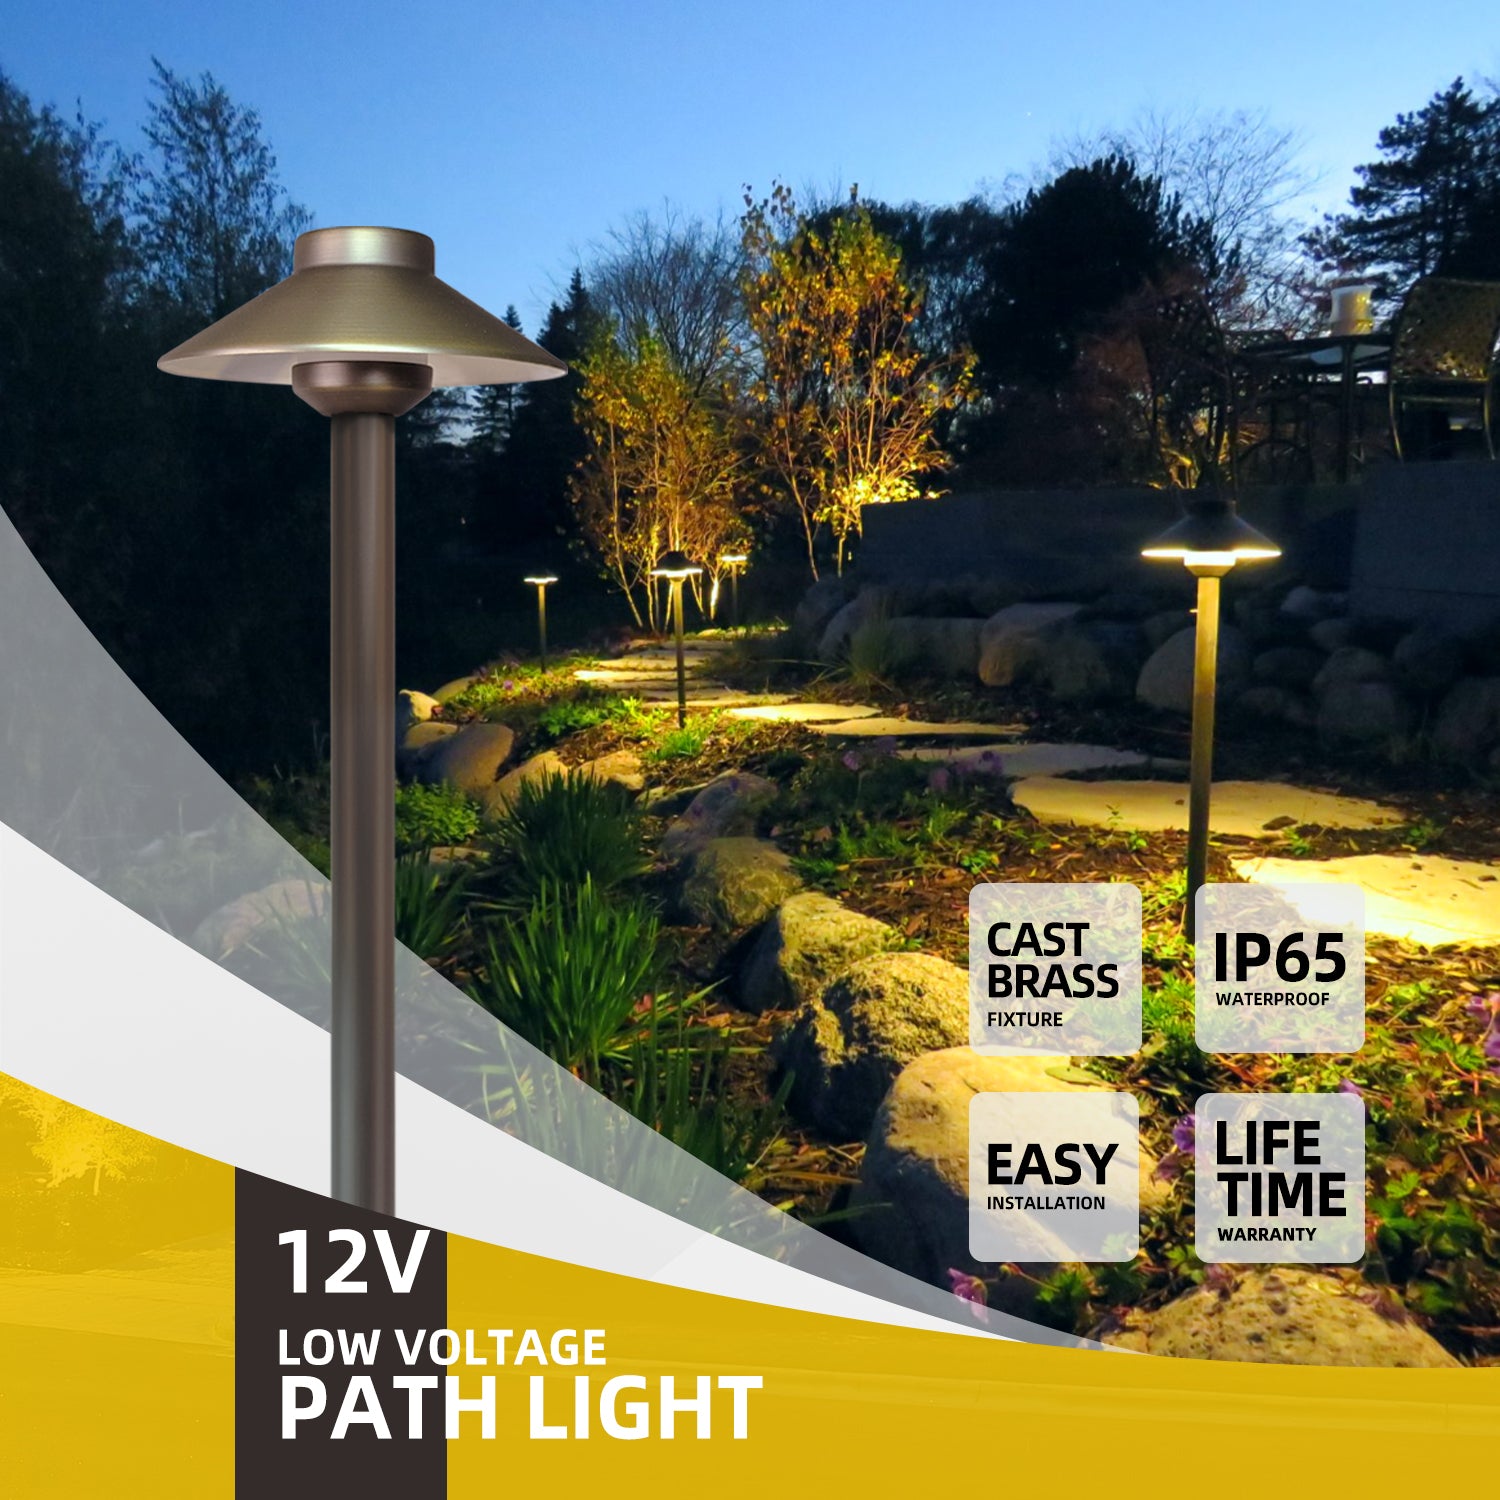 Dusk garden walkway illuminated by 12V low voltage brass path lights showcasing cast brass fixtures, IP65 waterproof rating, easy installation, and lifetime warranty